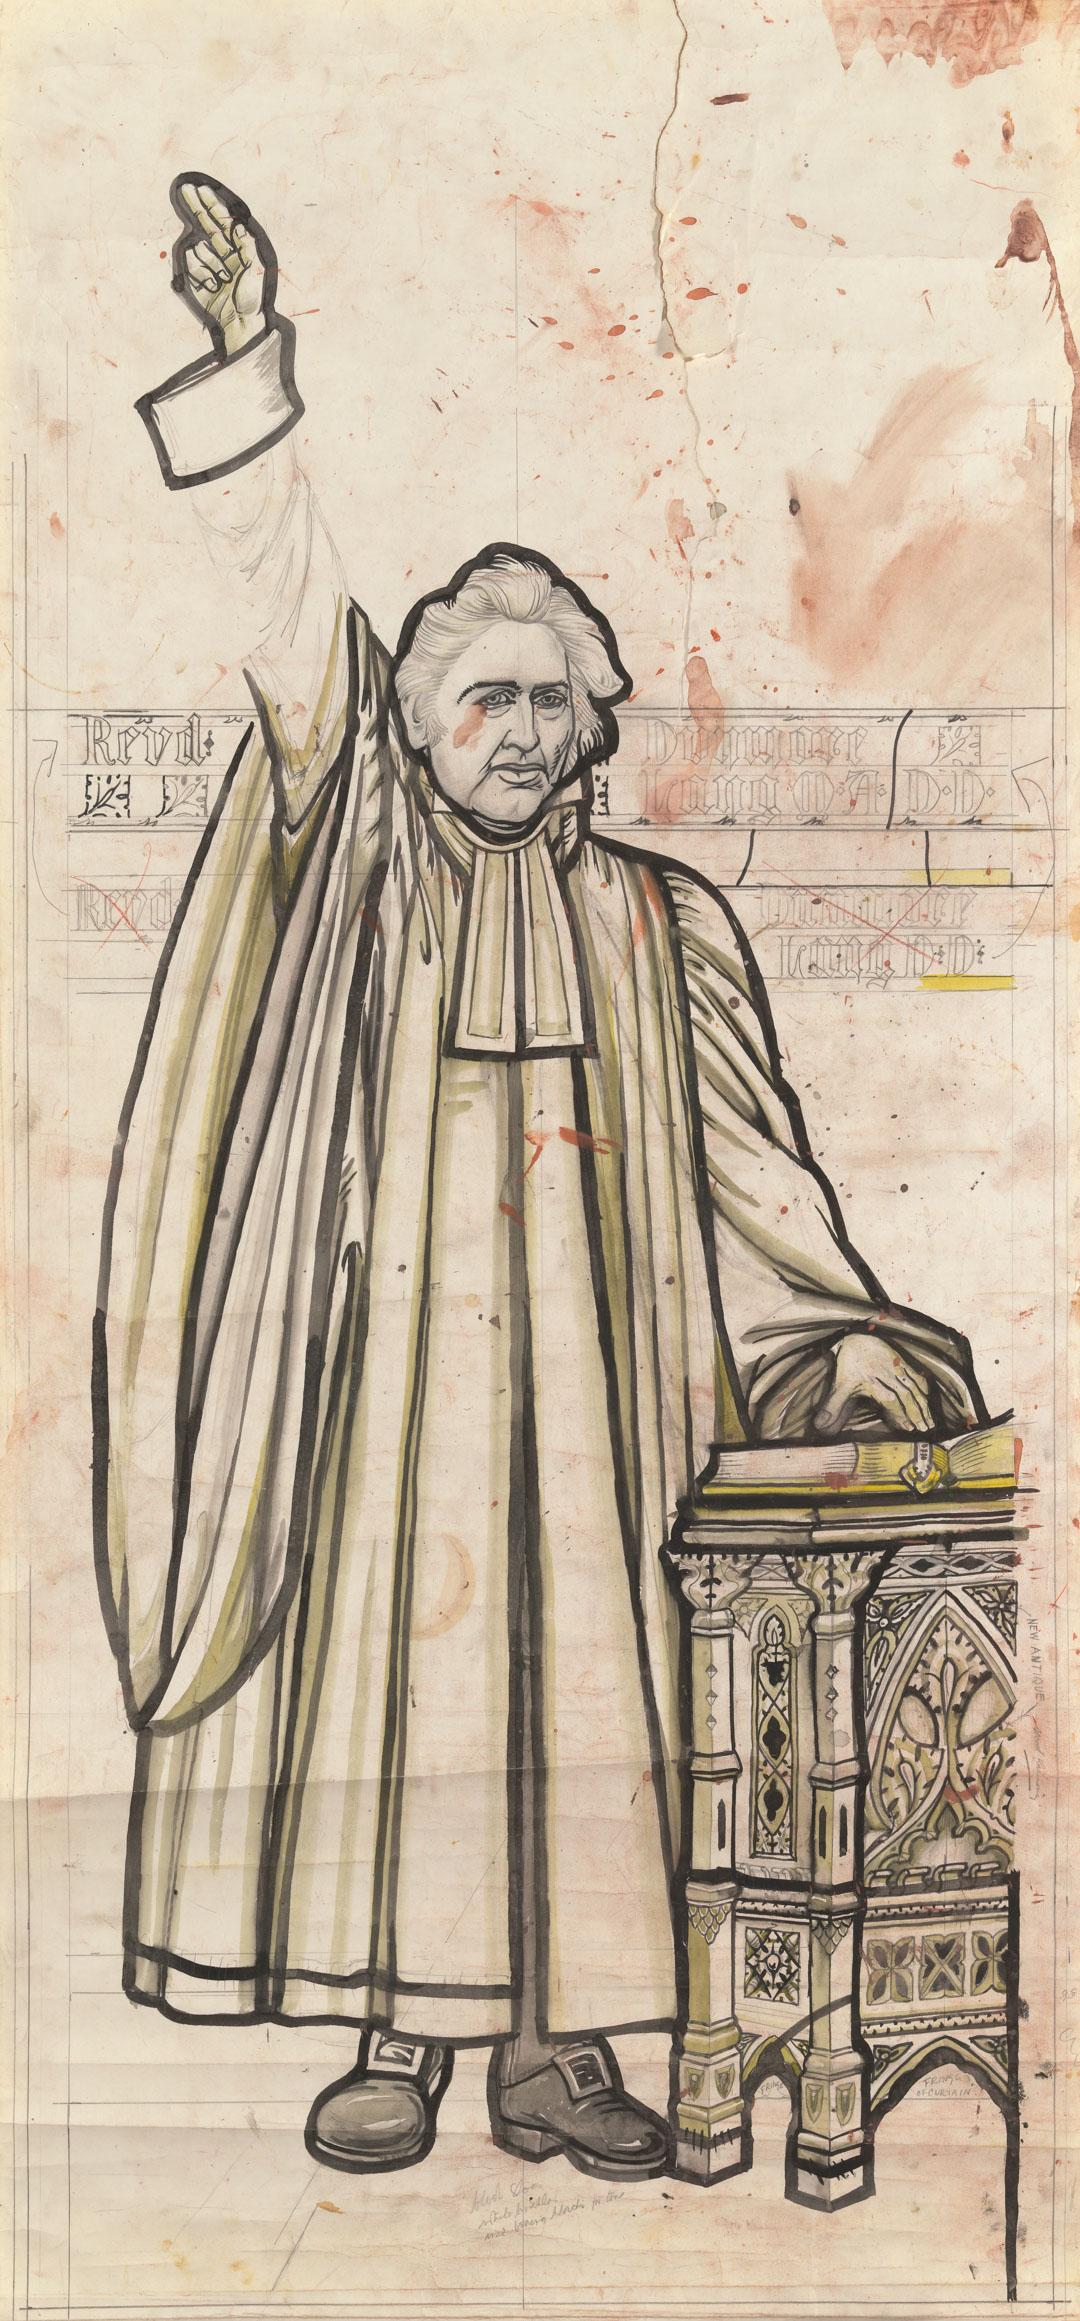 Artwork Sketch of Rev. John Dunmore Long for stained glass window, St Stephen's Presbyterian Church, Ipswich this artwork made of Pencil and watercolour on paper